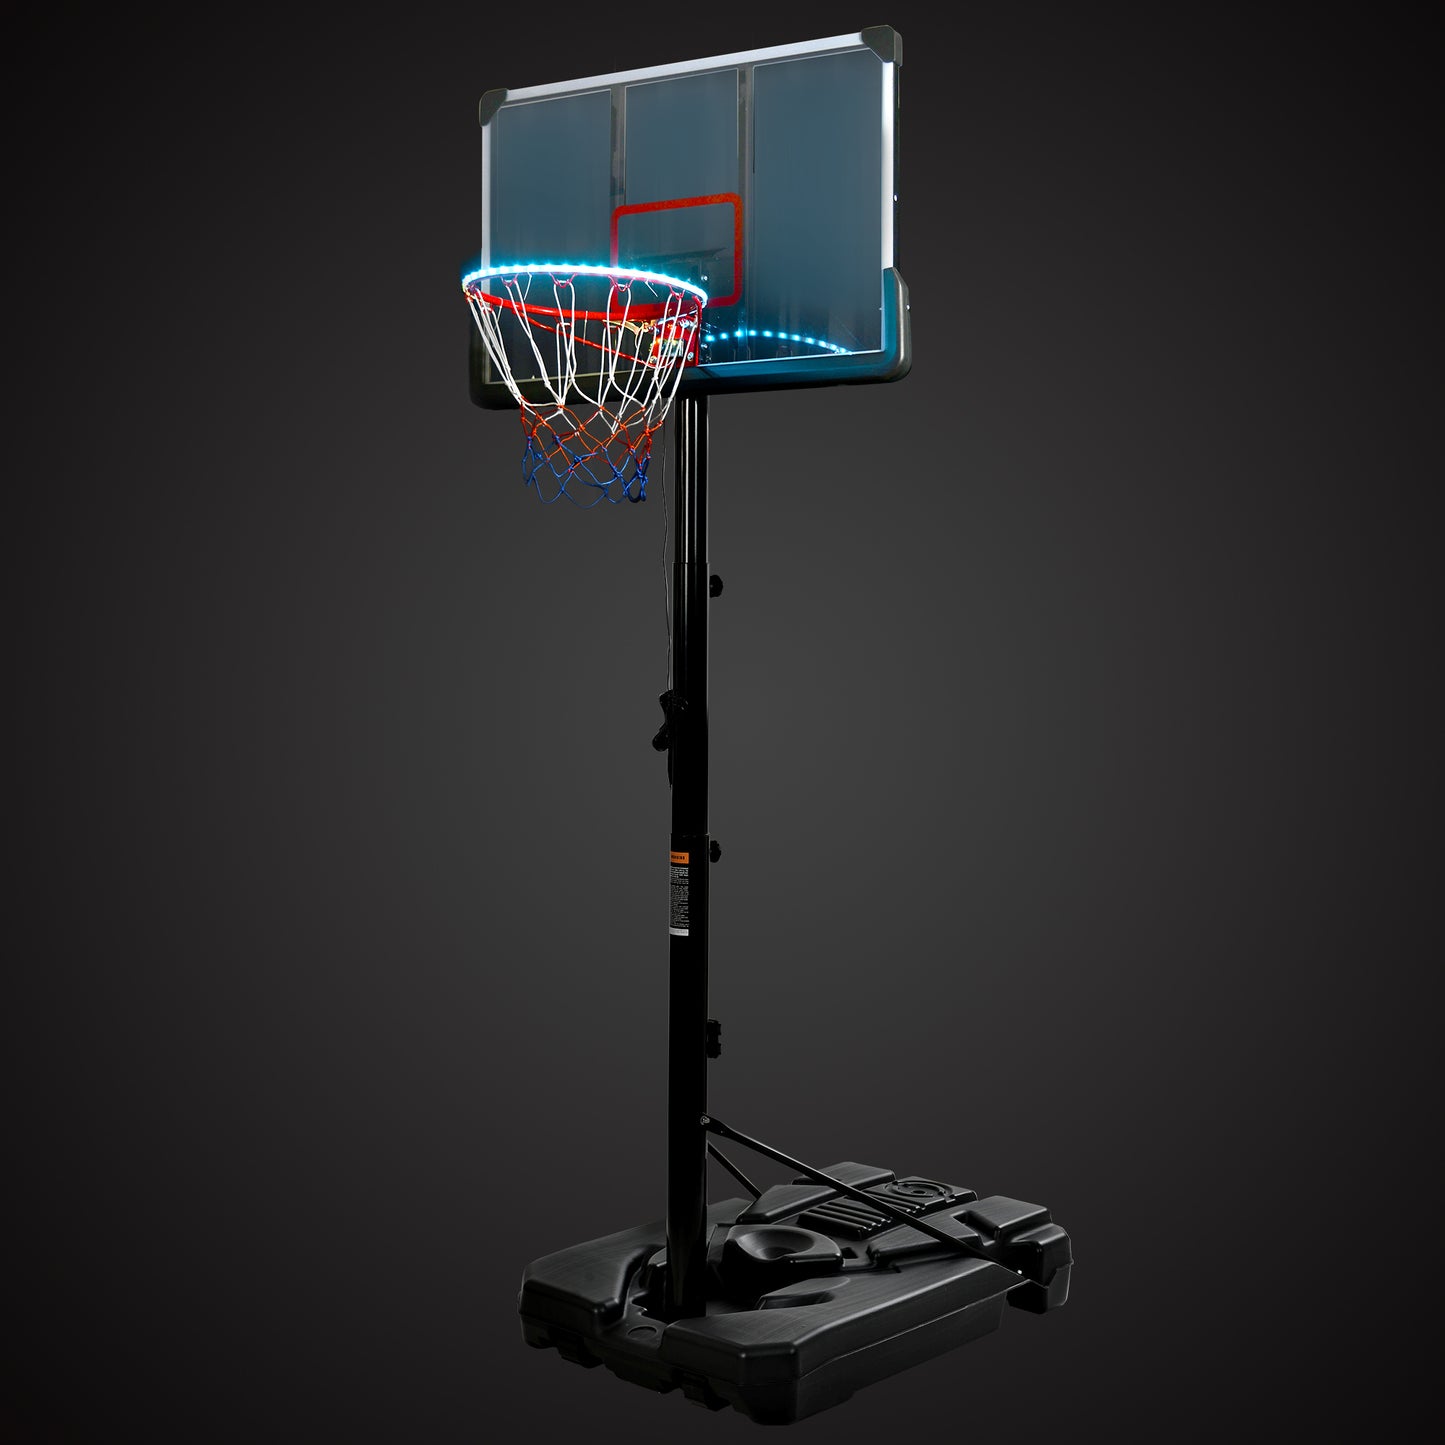 Portable Basketball Hoop Basketball System 6.6-10ft Height Adjustment for Youth Adults LED Basketball Hoop Lights, Colorful lights, Waterproof，Super Bright to Play at Night Outdoors,Good Gift for Kids